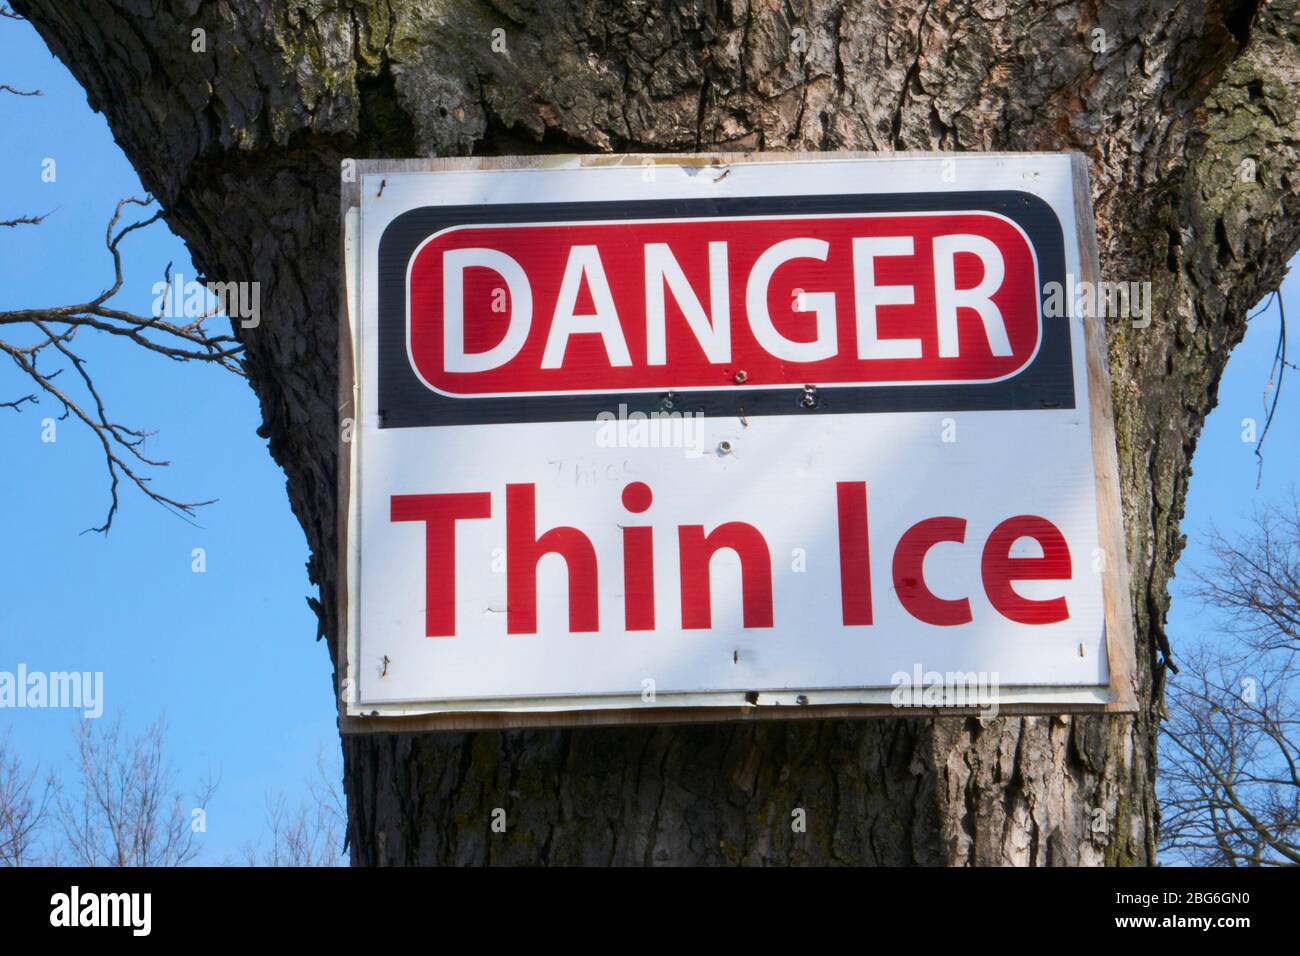 Danger Thin Ice sign attached to a tree in a park. Stock Photo